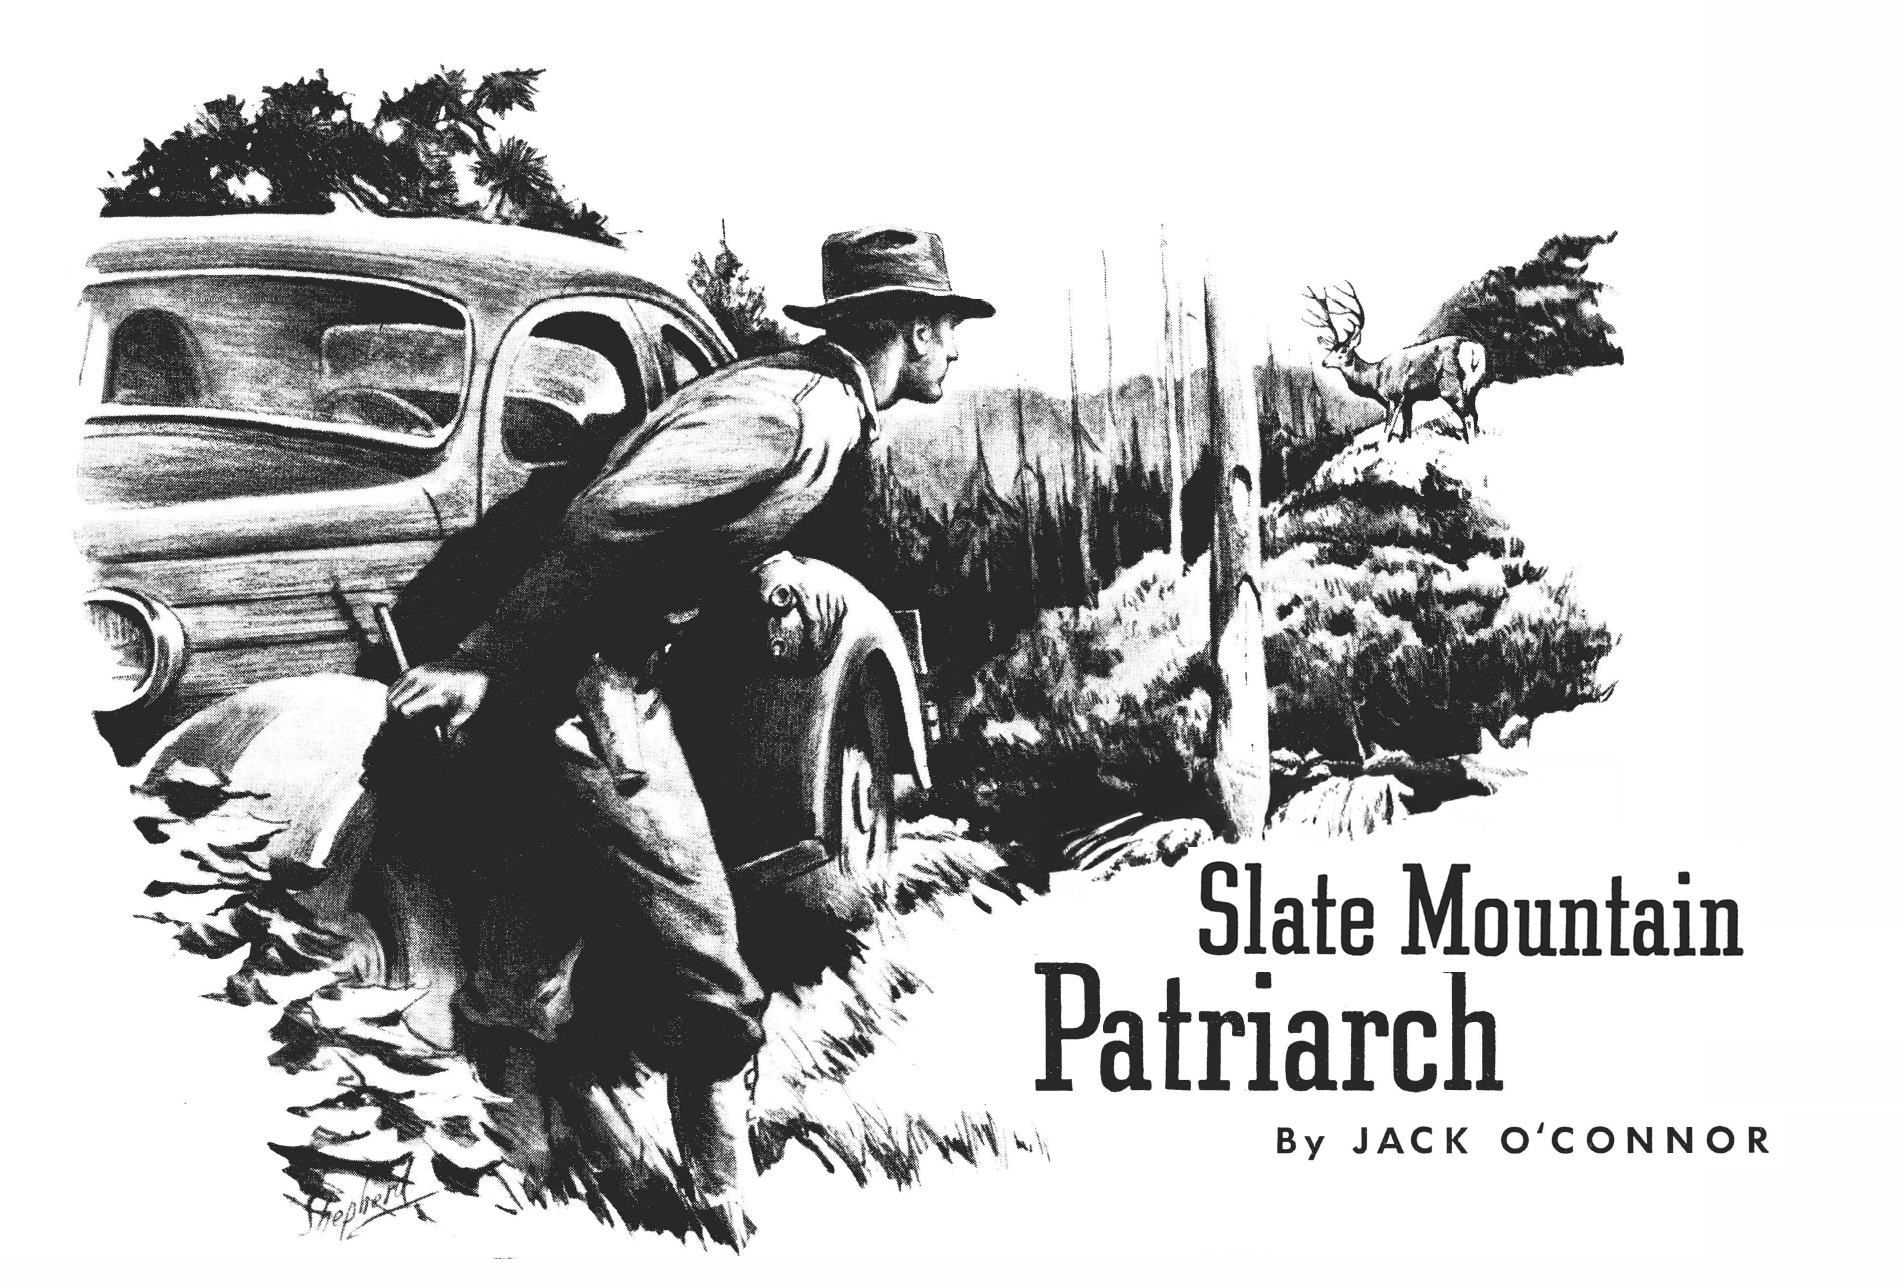 Jack O'Connor spots a giant mule deer in this black and white illustration.